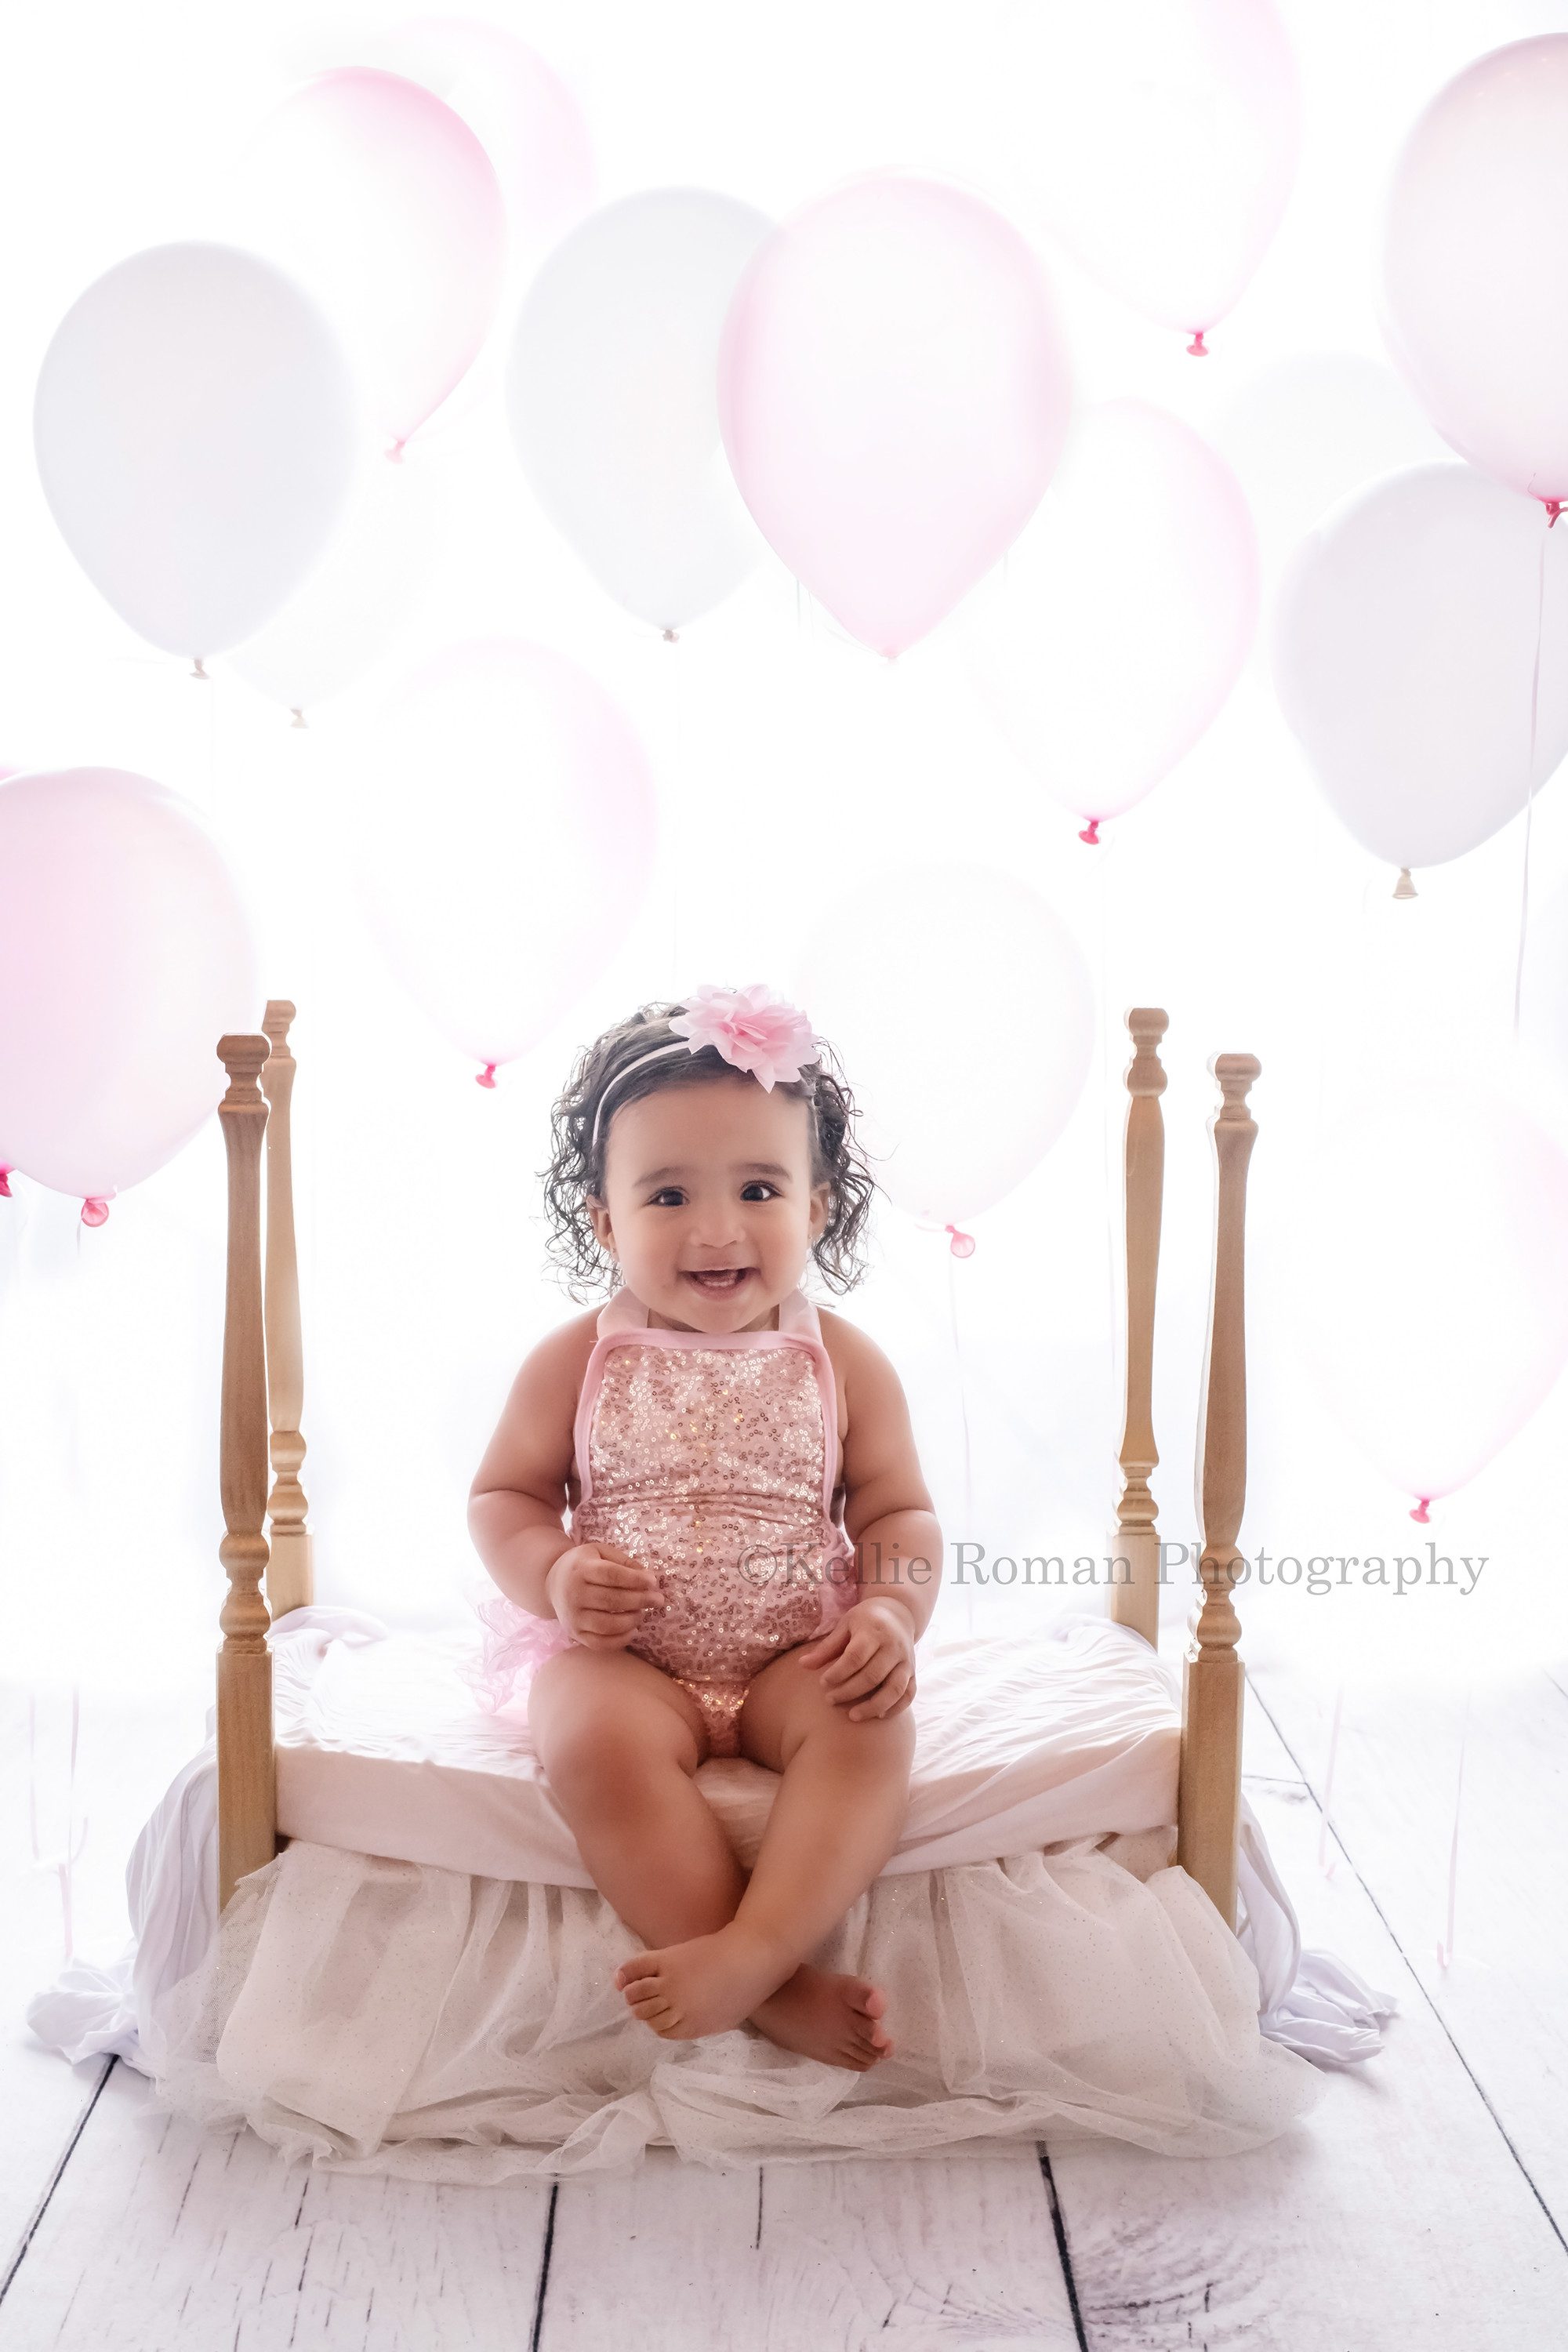 milwaukee cake smash photographer a one year old little girl is in a milwaukee Wisconsin photography studio in greendale. She is wearing a pink and gold sequin romper and is sitting on a gold four post bed she's smiling at the camera and crossing her ankles. The backdrop is bright white with pink and white balloons.